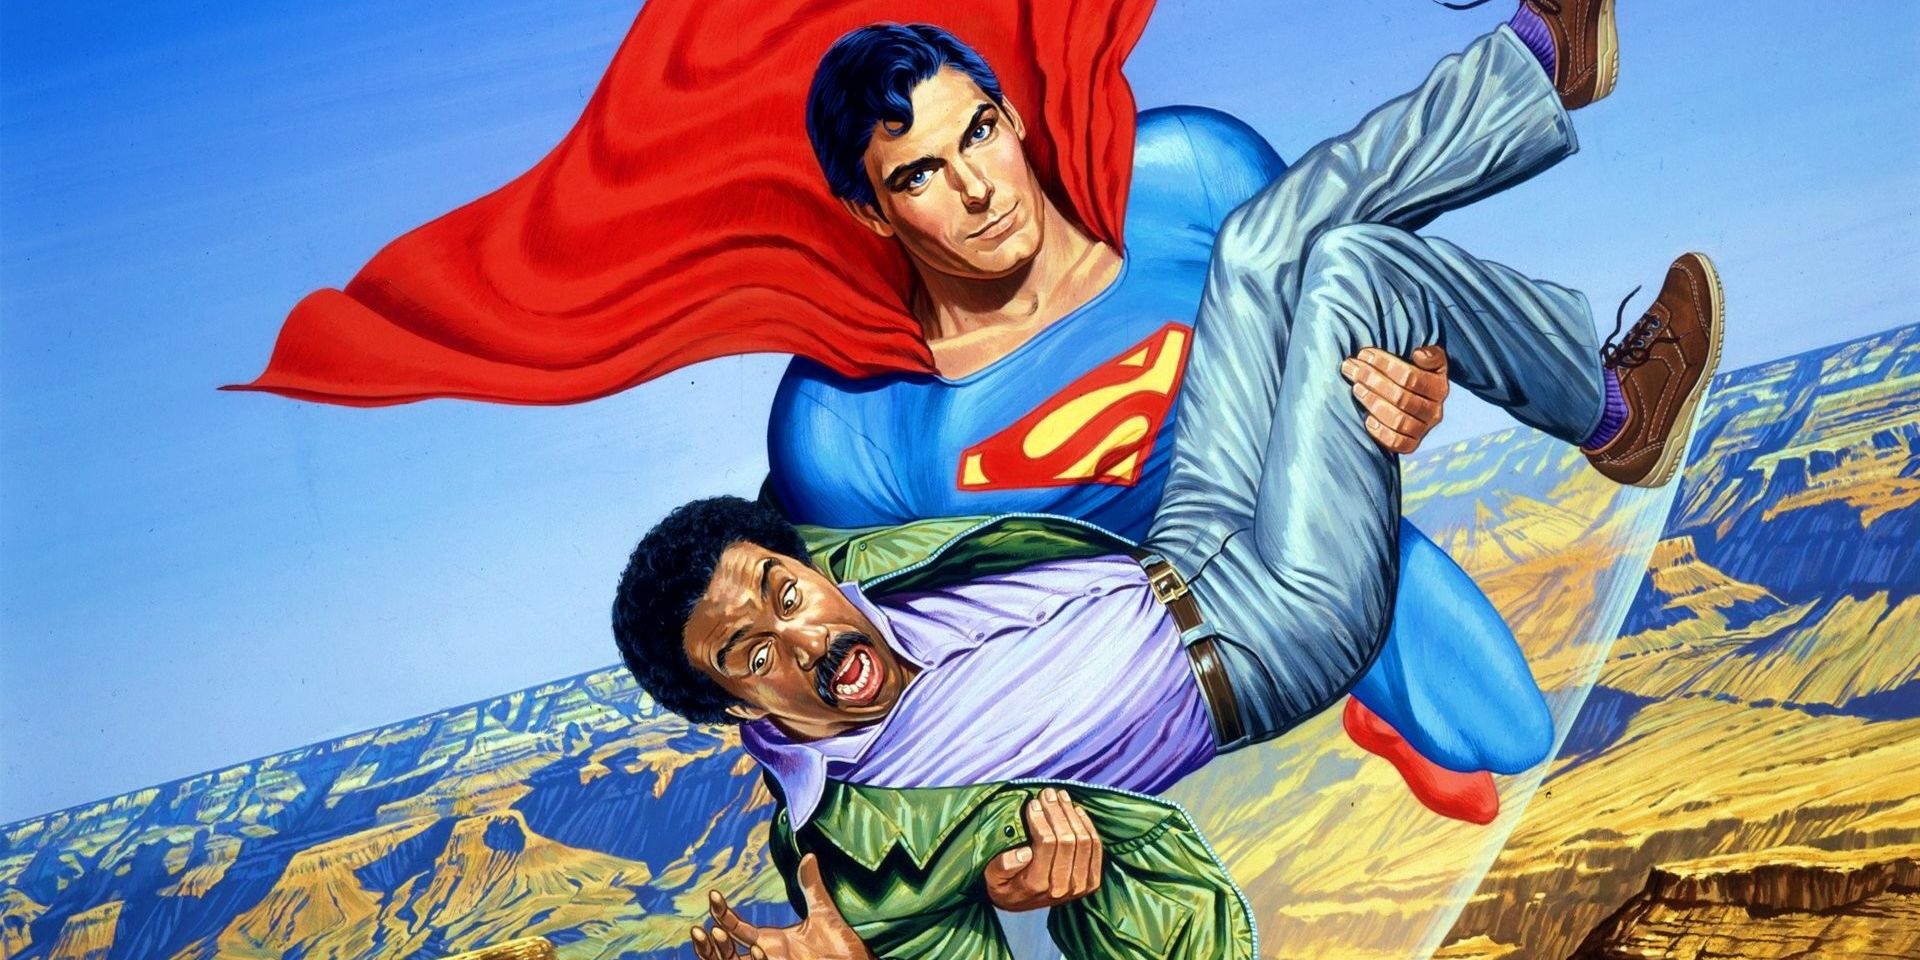 christopher reeve and richard pryor in superman 3 poster